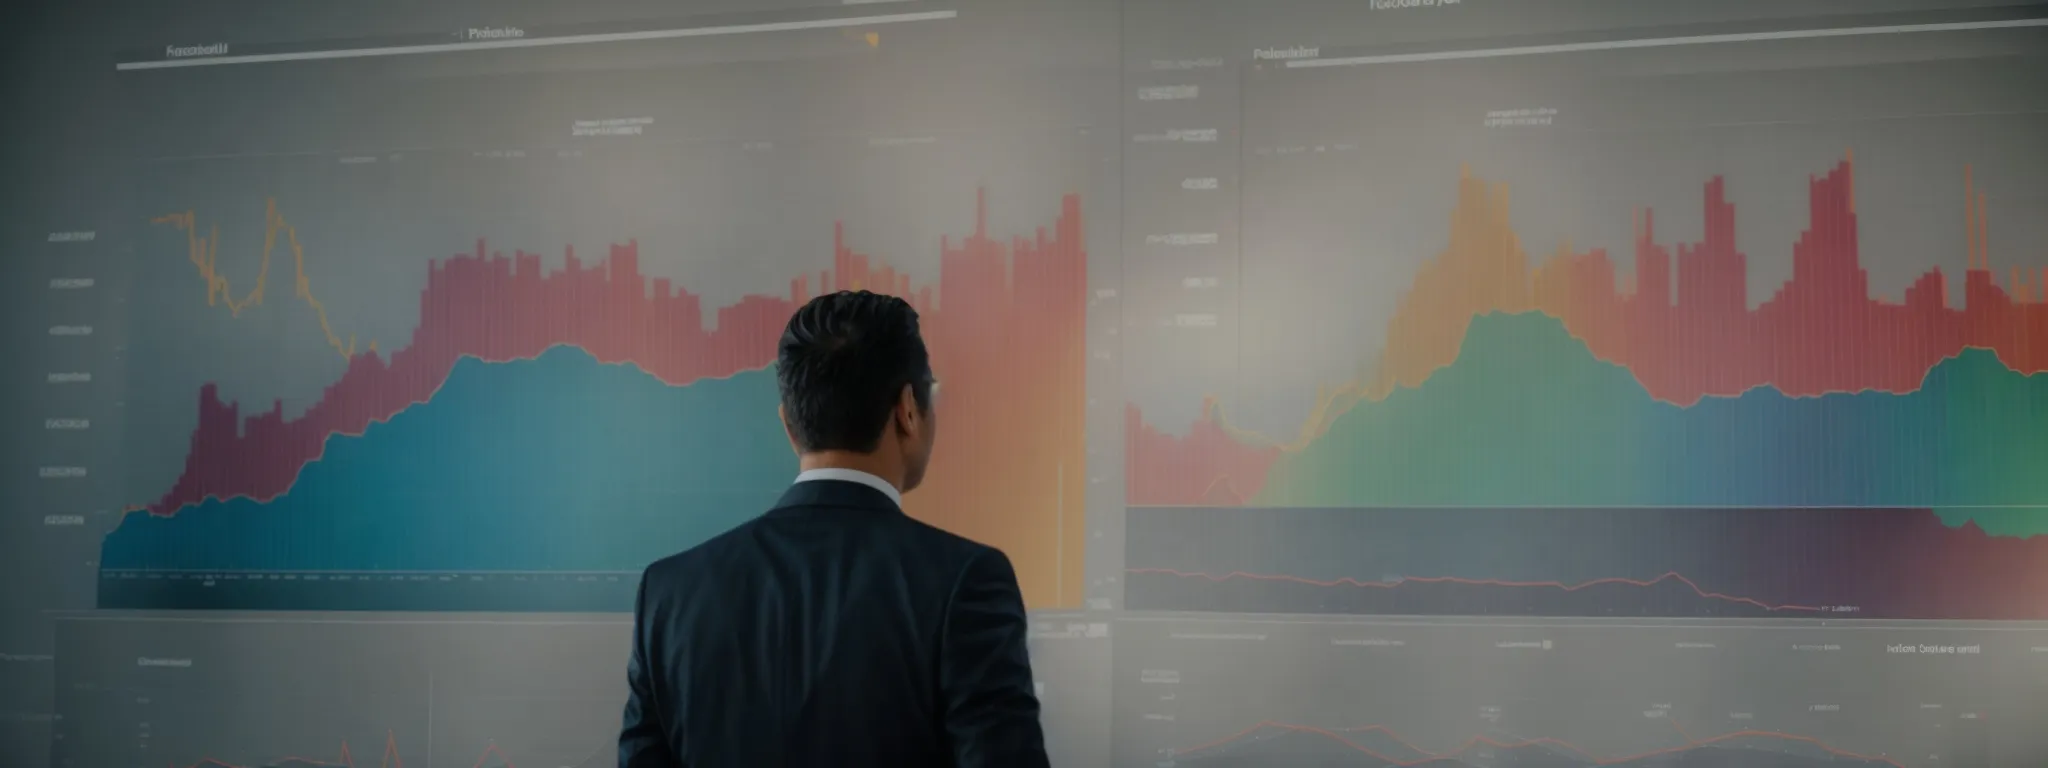 a businessperson stands before a large board displaying a variety of colorful graphs and charts representing different pricing strategies.